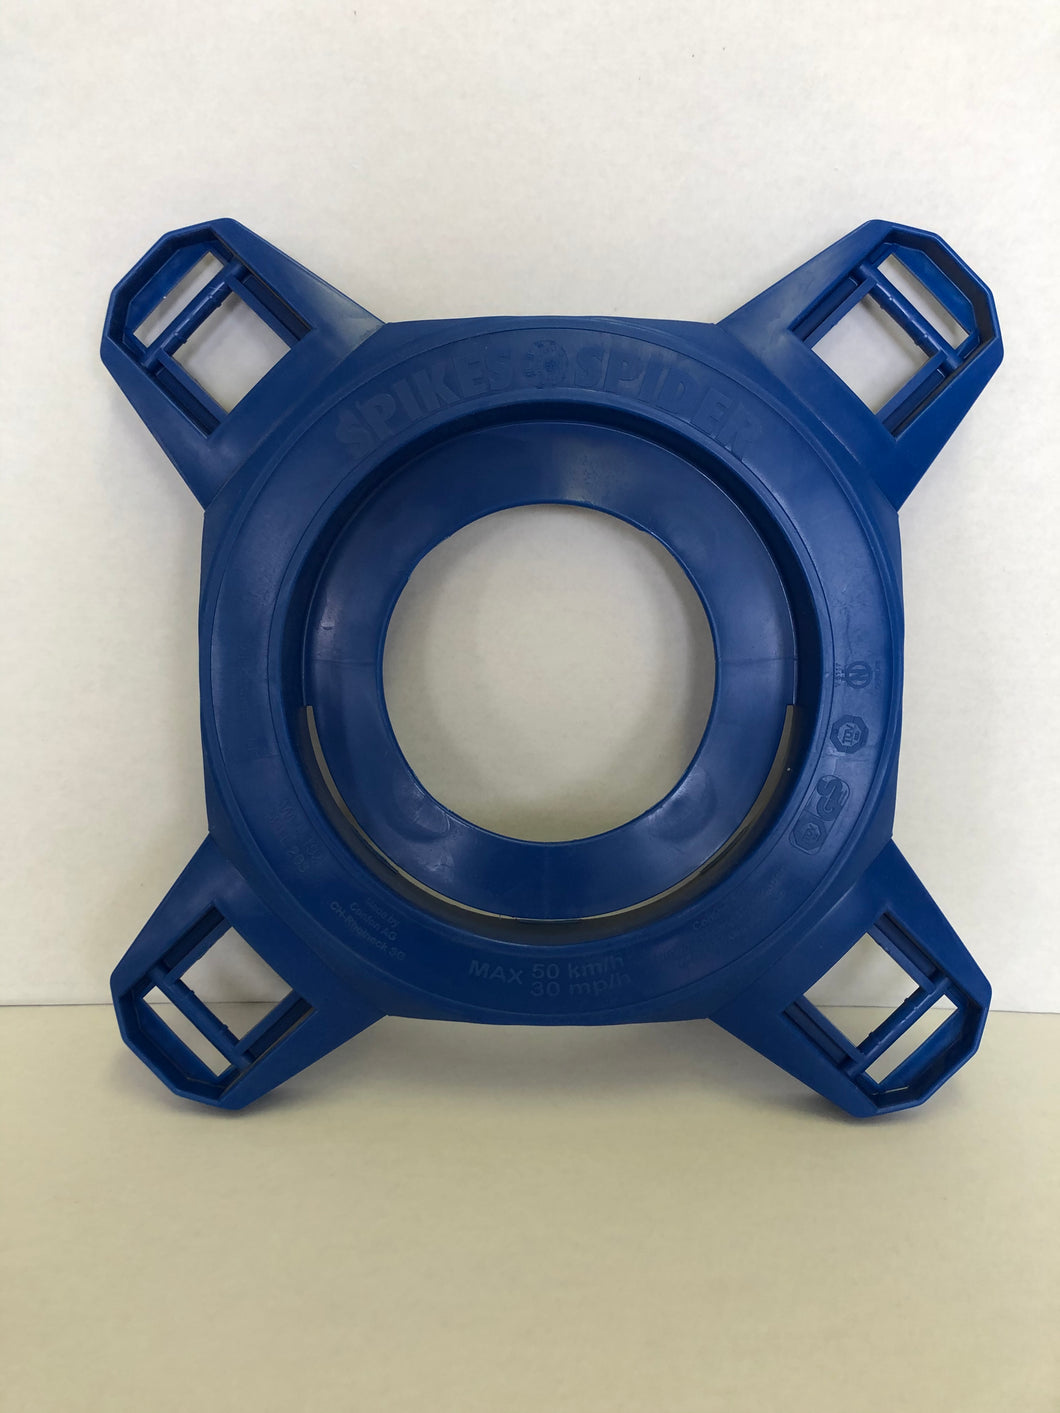 93.100.24 Support Ring Alpine Pro Size 2; Blue